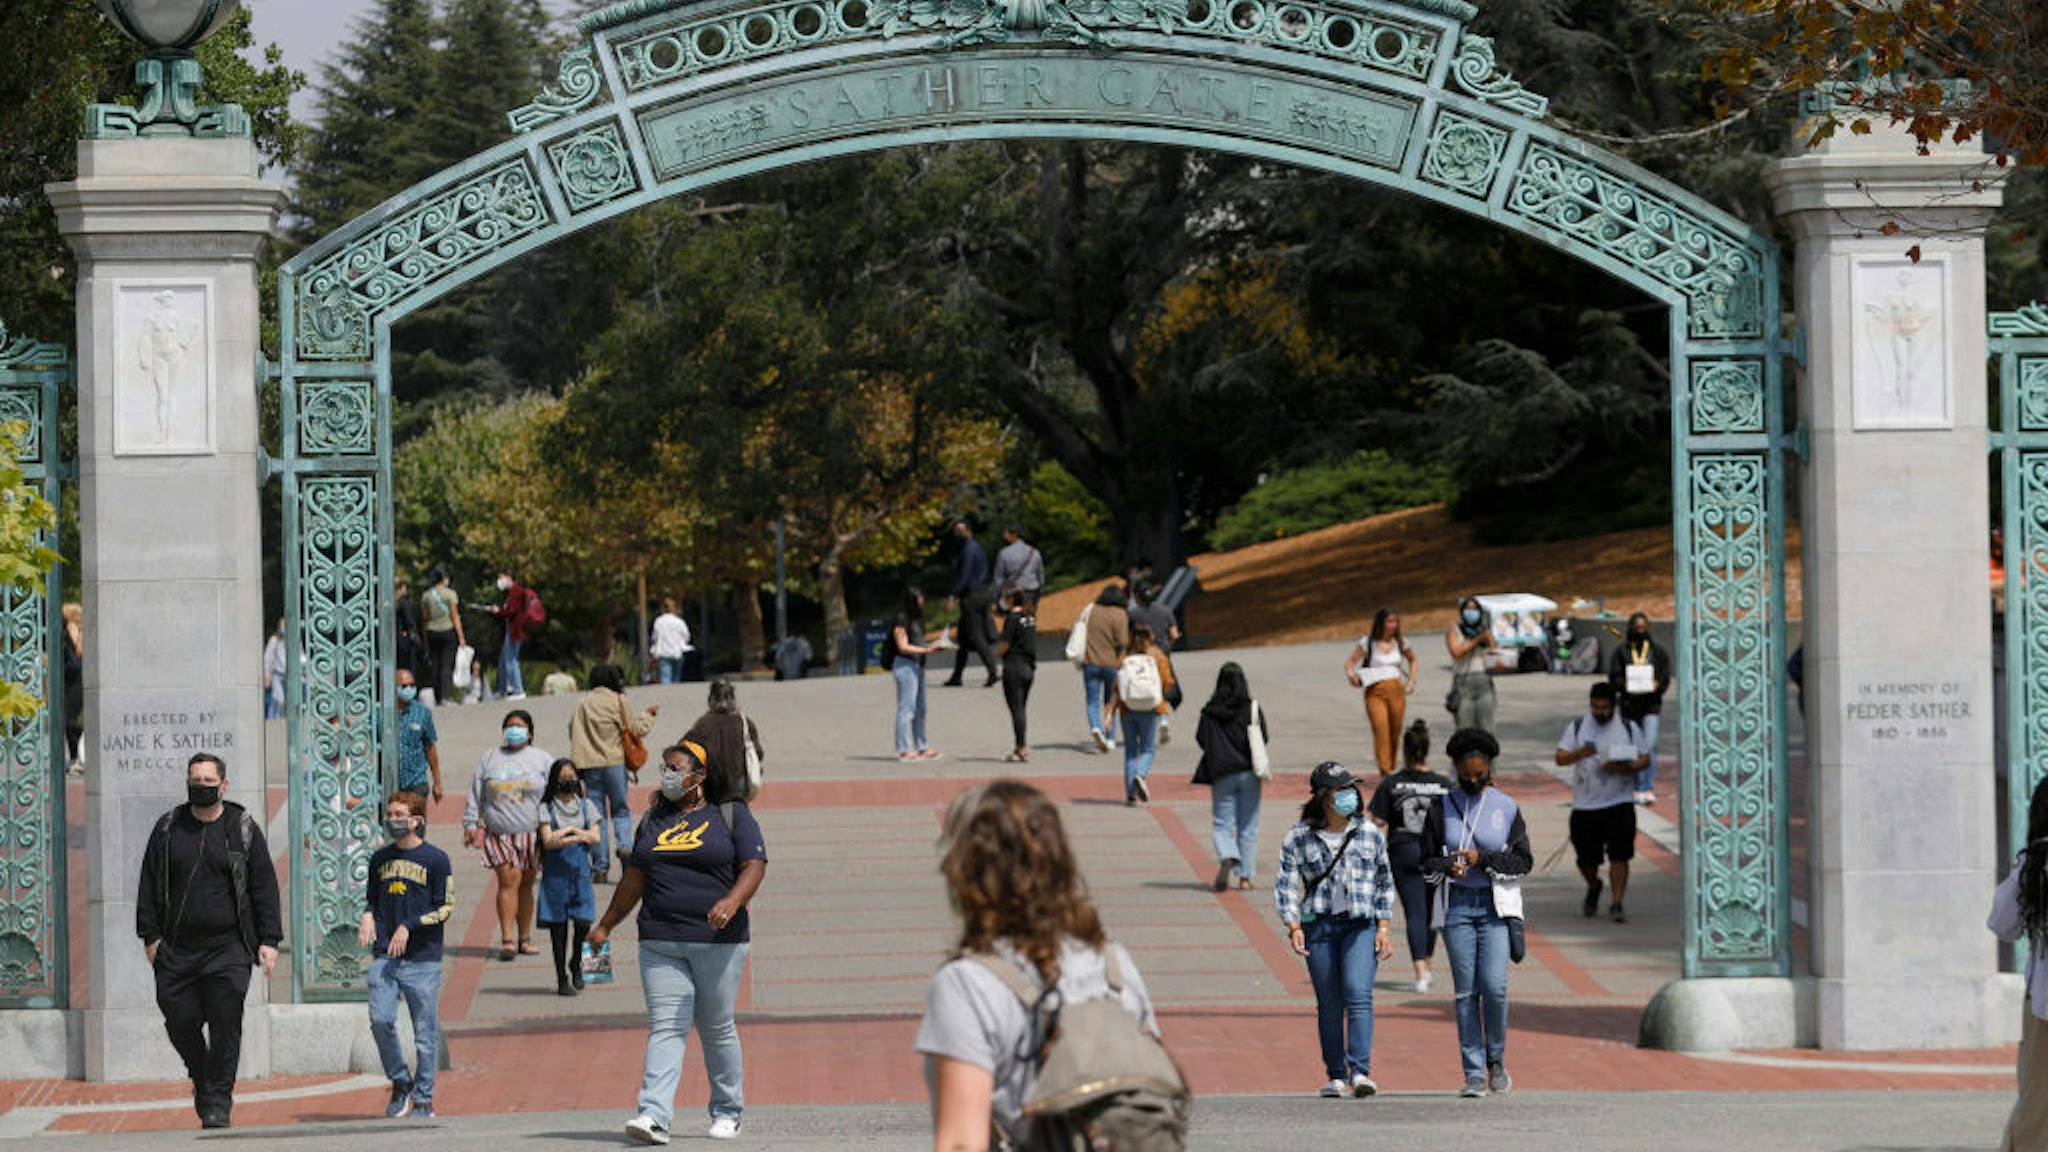 Students walk near the Sather Gate on the UC Berkeley campus in Berkeley, Calif., on Tuesday, August 24, 2021.